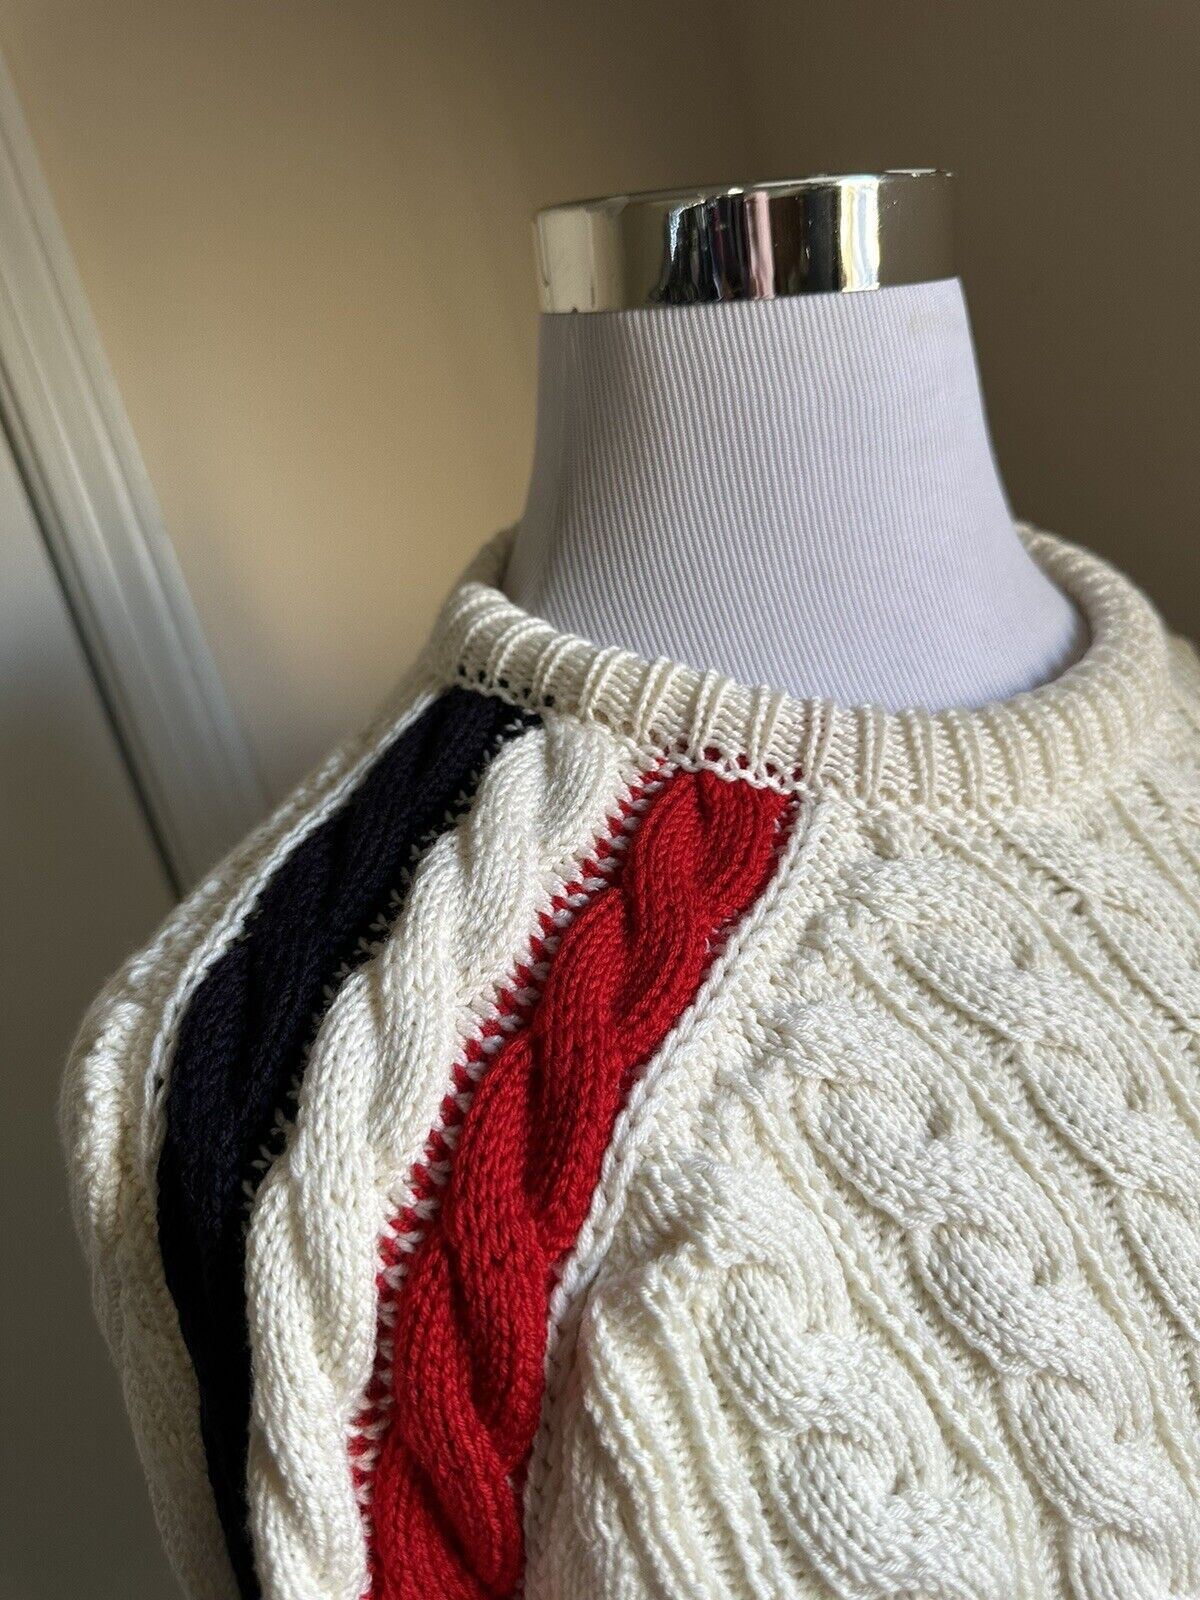 NWT Thom Browne Men Cable Knit Merino Wool Sweater White Size S ( 1 ) Ireland